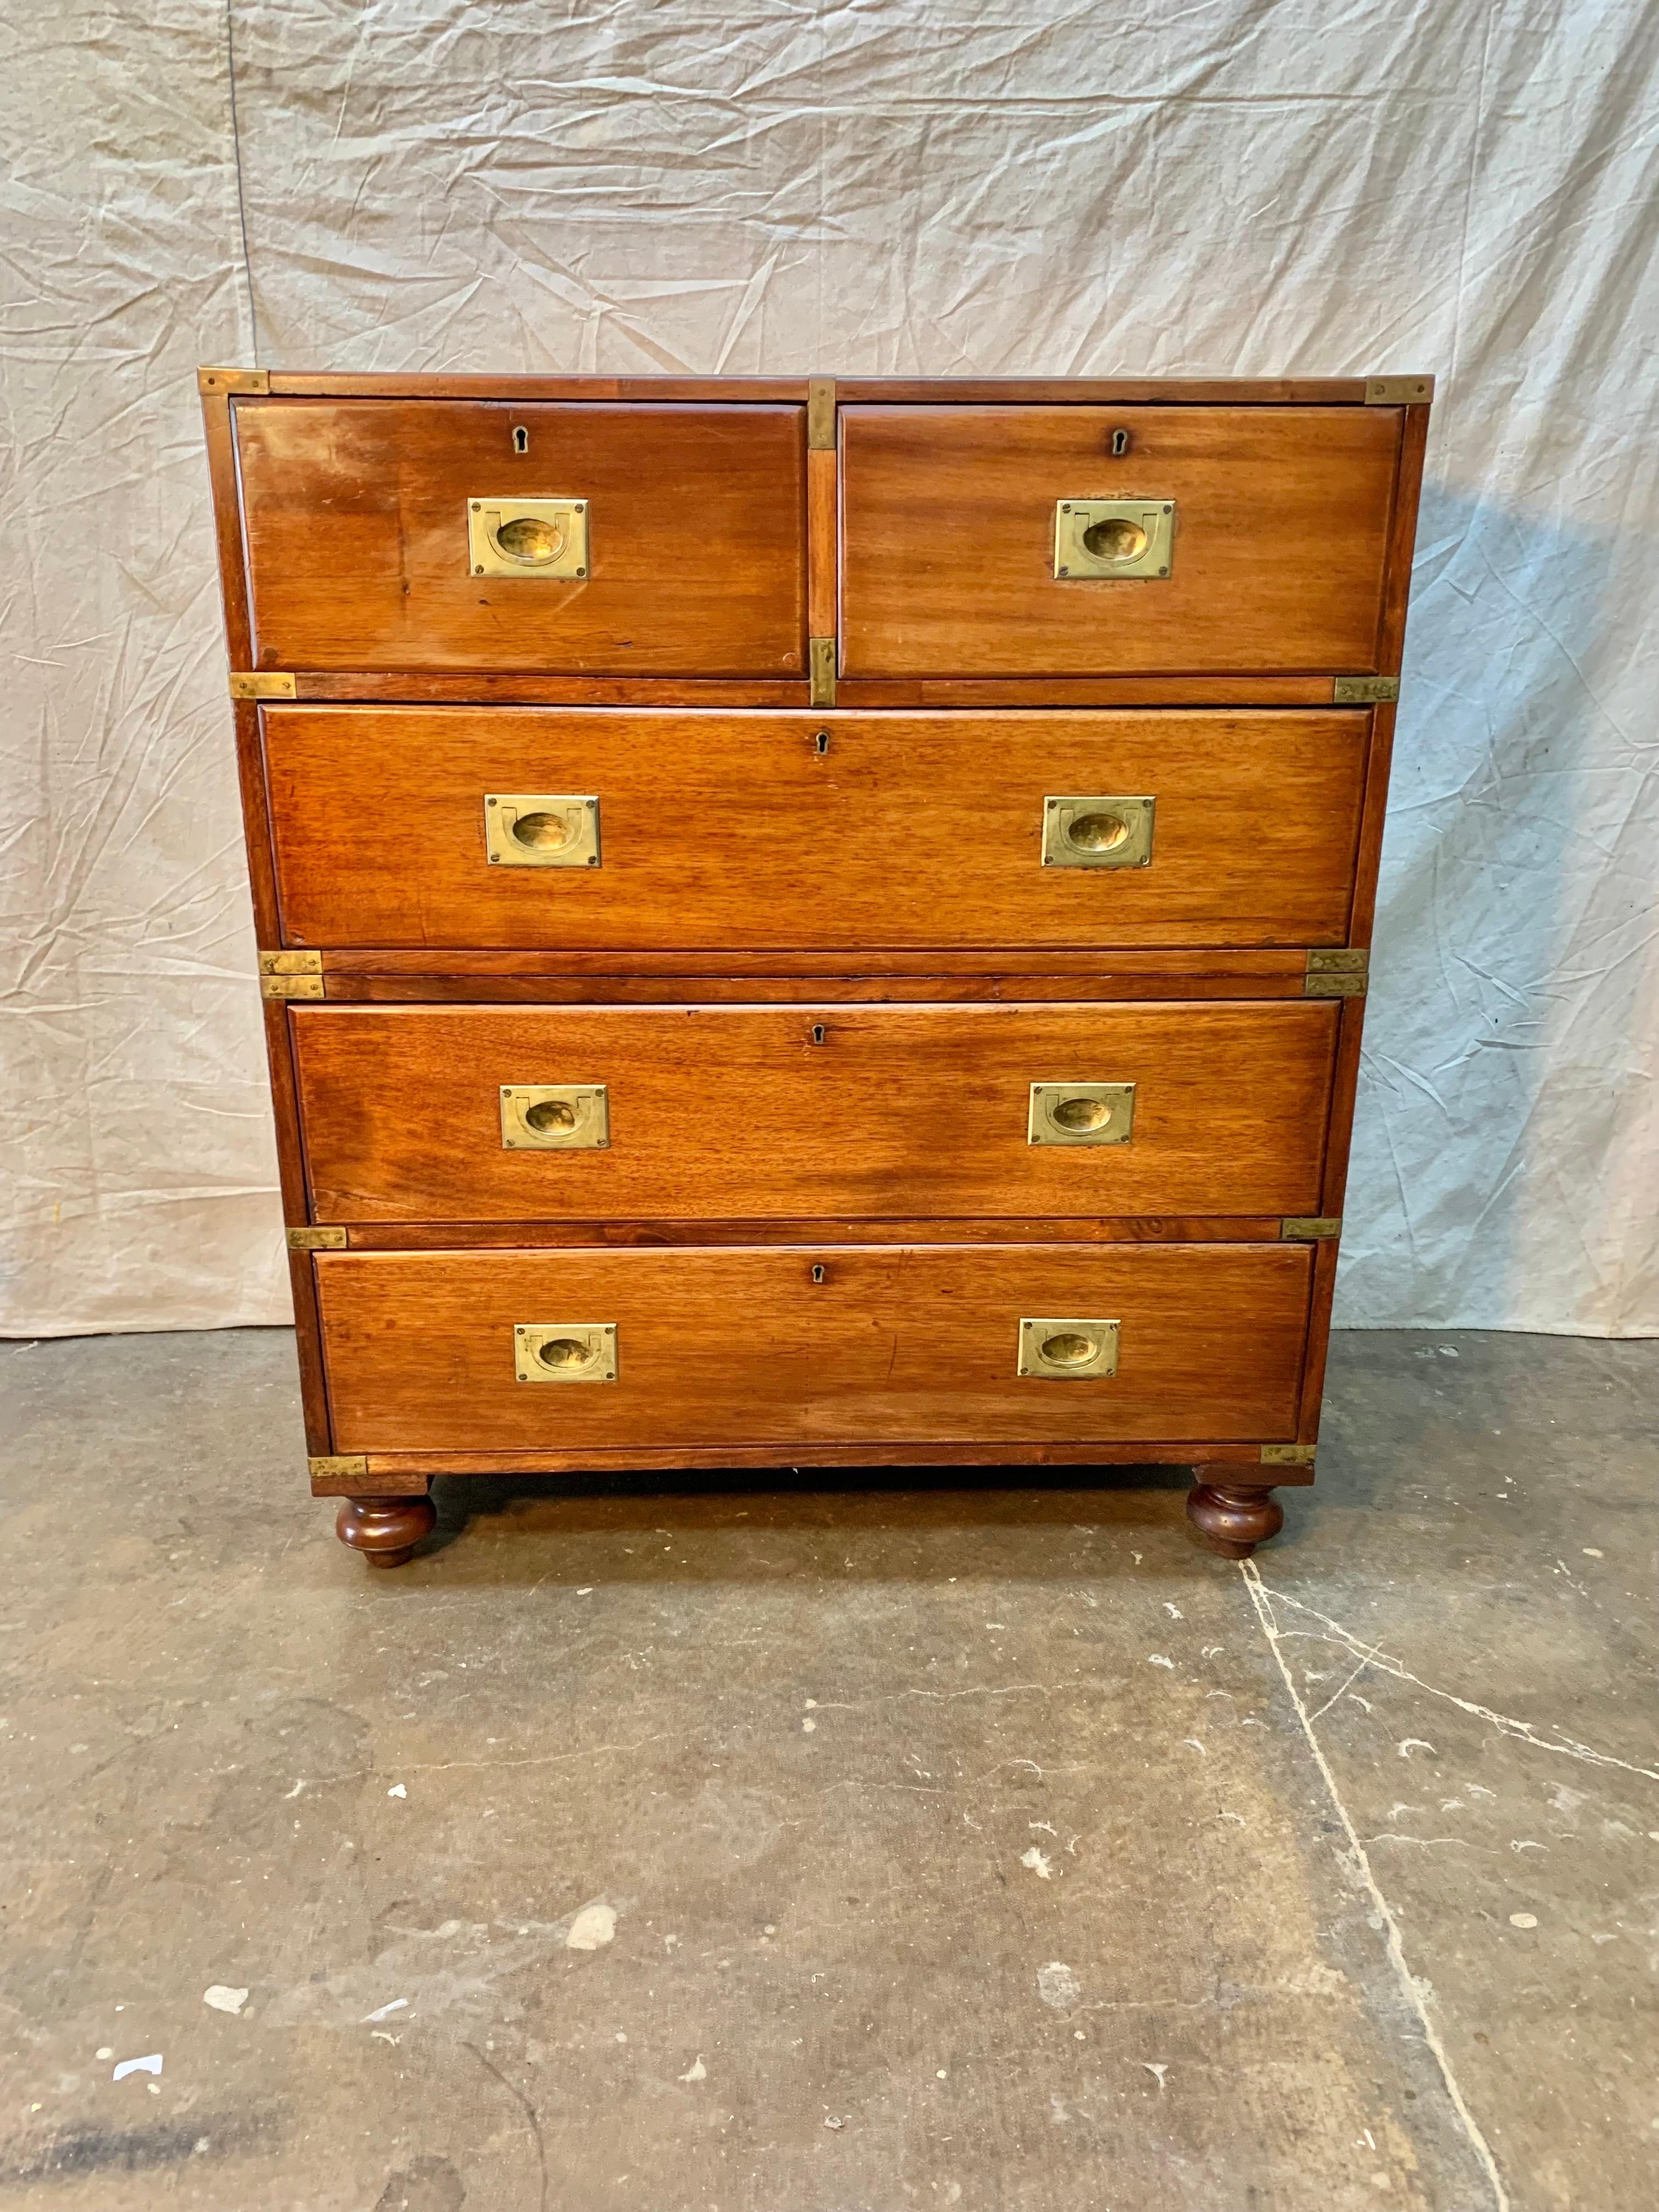 This 19th Century English Mahogany Campaign Chest of Drawers is made of two parts each flanked with side handles to allow for easier transport. The corners of the piece are covered in brass to protect them. The top portion measures 36